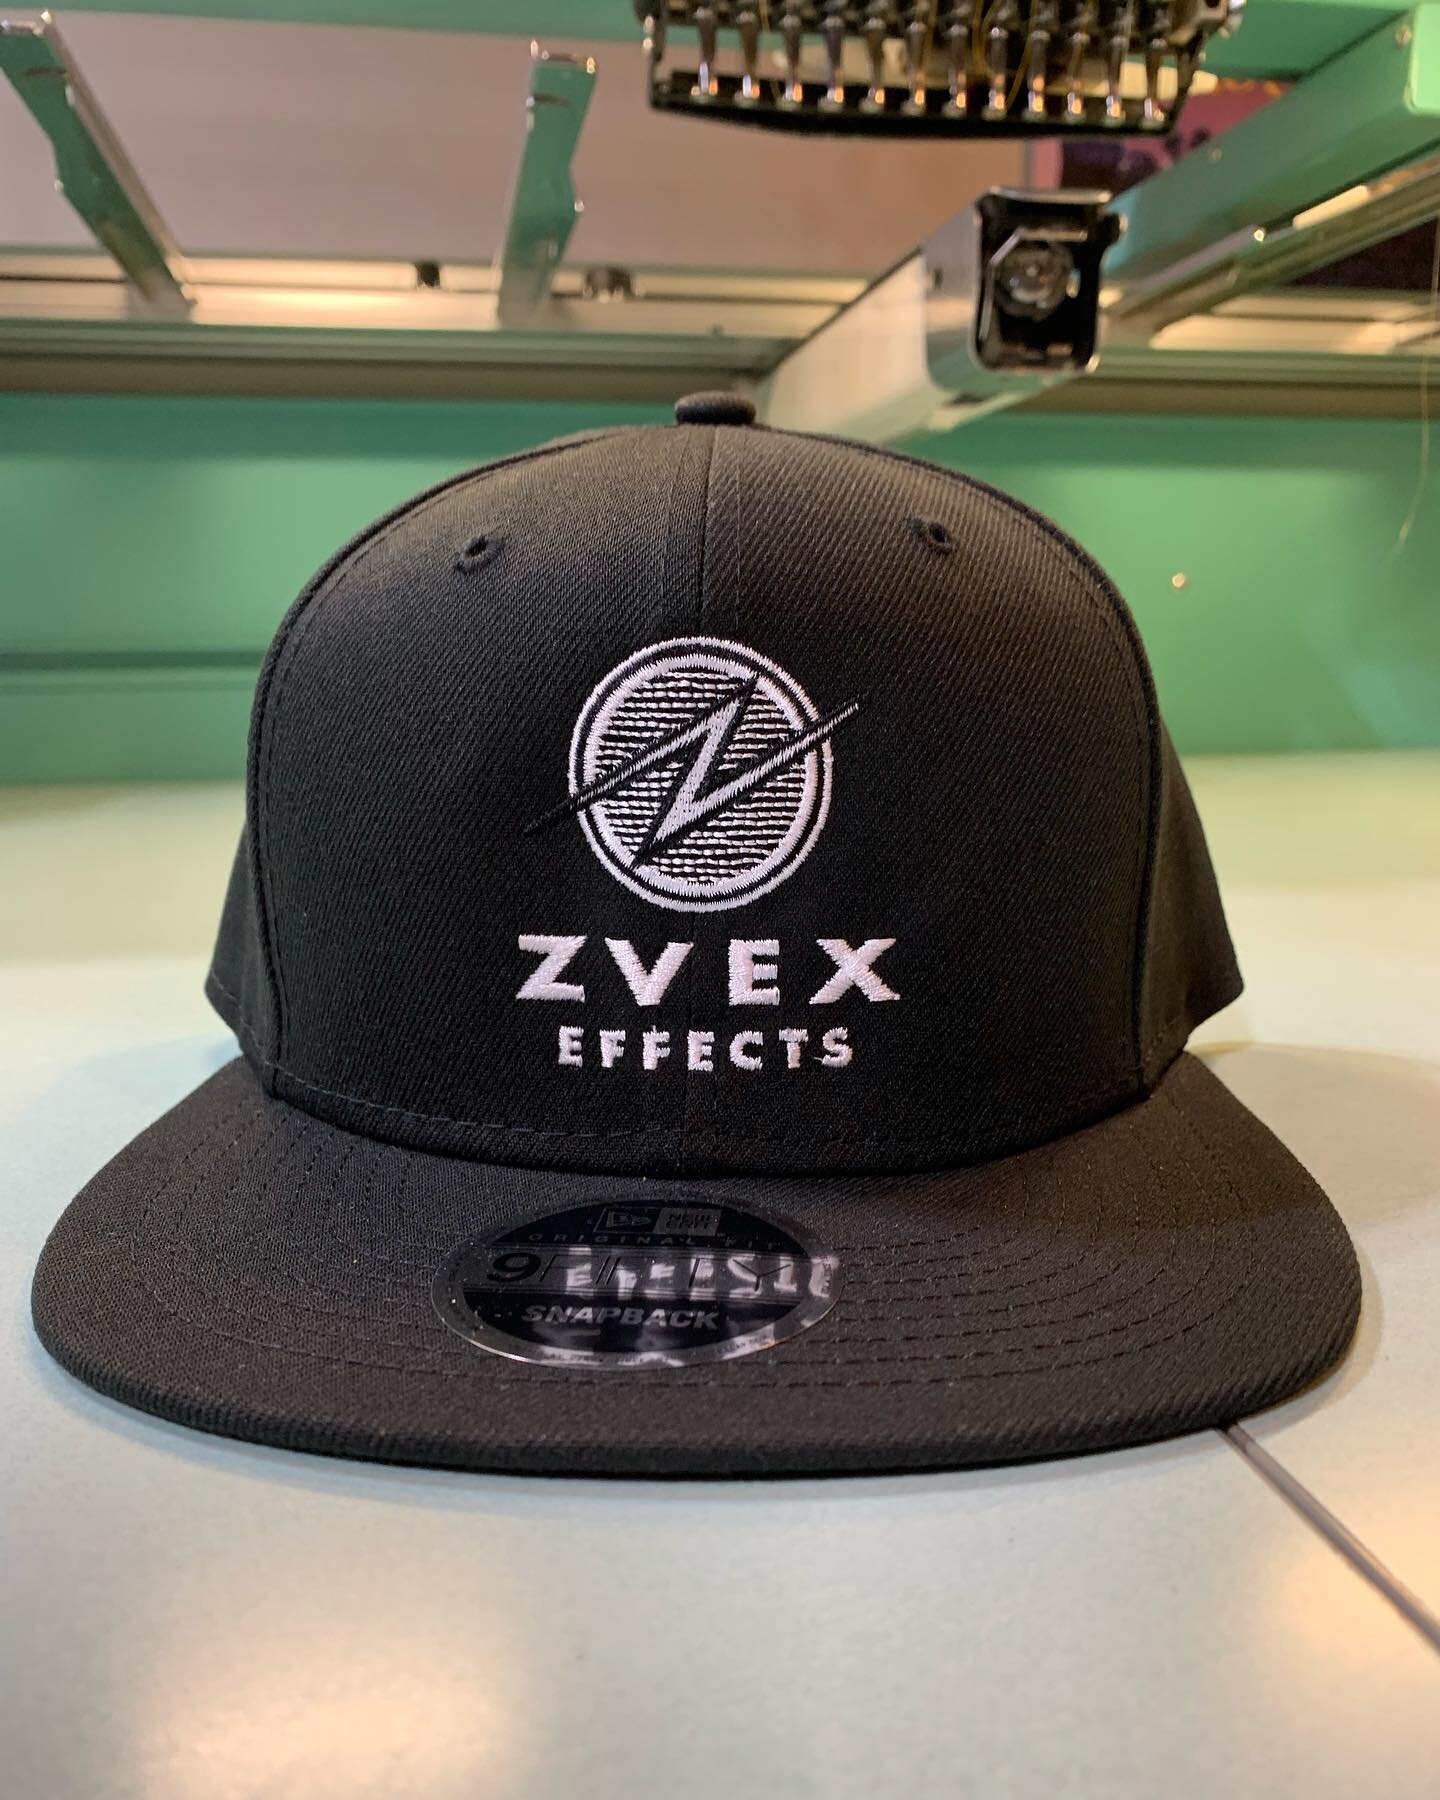 Always a pleasure working with pedal legends @zvexeffects
You already know they make the best pedals.
.
.
.
Thanks @circuitsandkittens 🖤
.
.
#zvex #zvexeffects #pedal #cap #newera #embroidery #tajima #jensoncreative #twincities #minnesota #mn